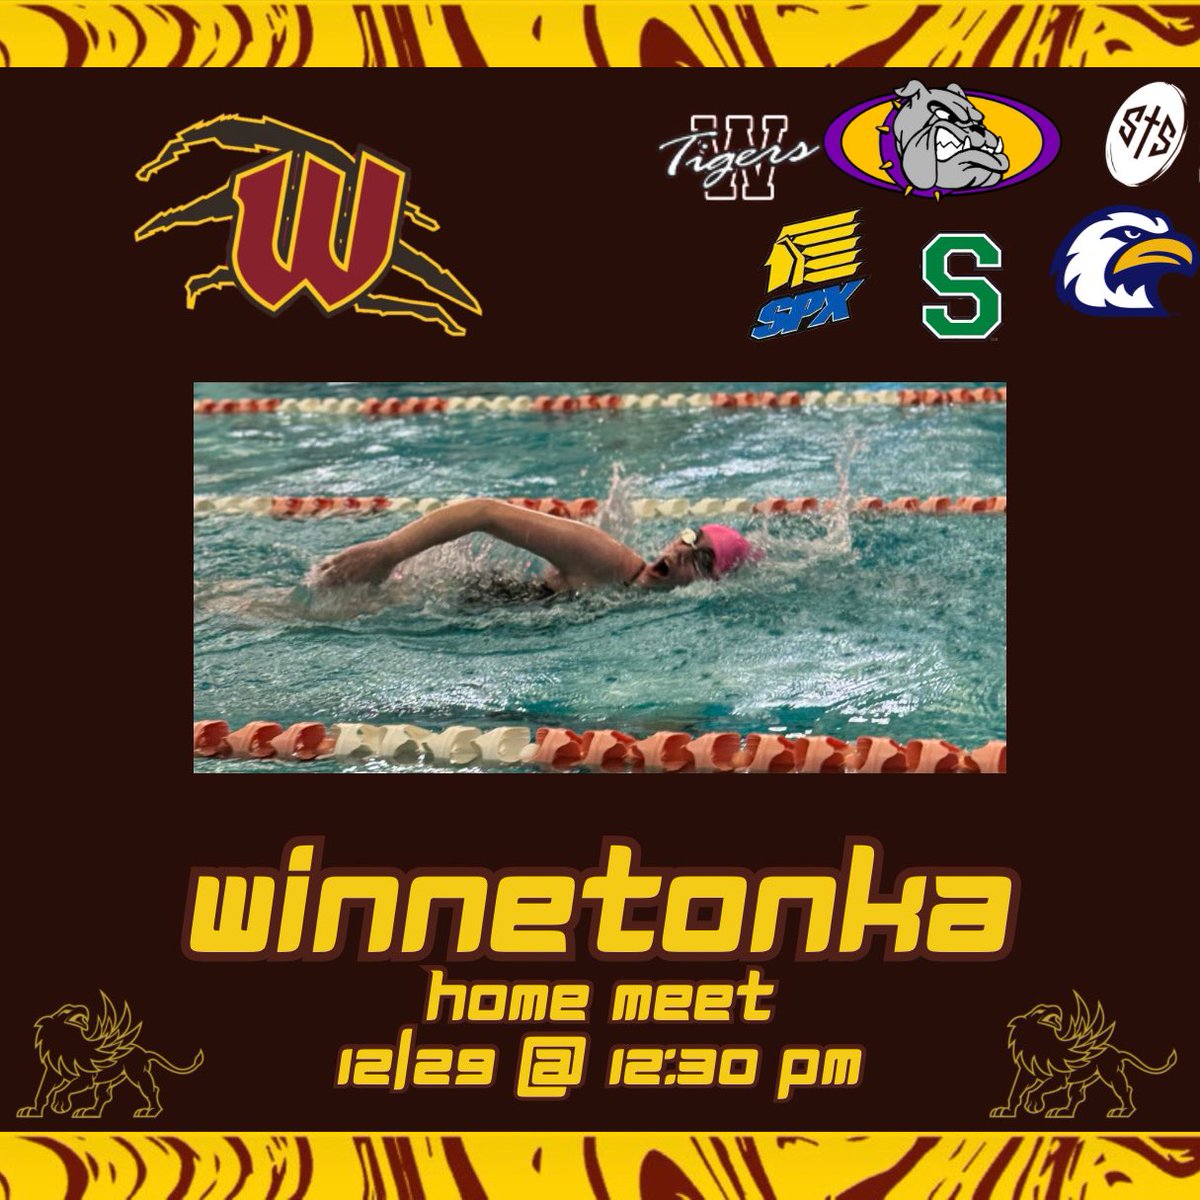 Join us tomorrow at Gladstone Community Center for our next home swim/dive meet! #TonkaNation